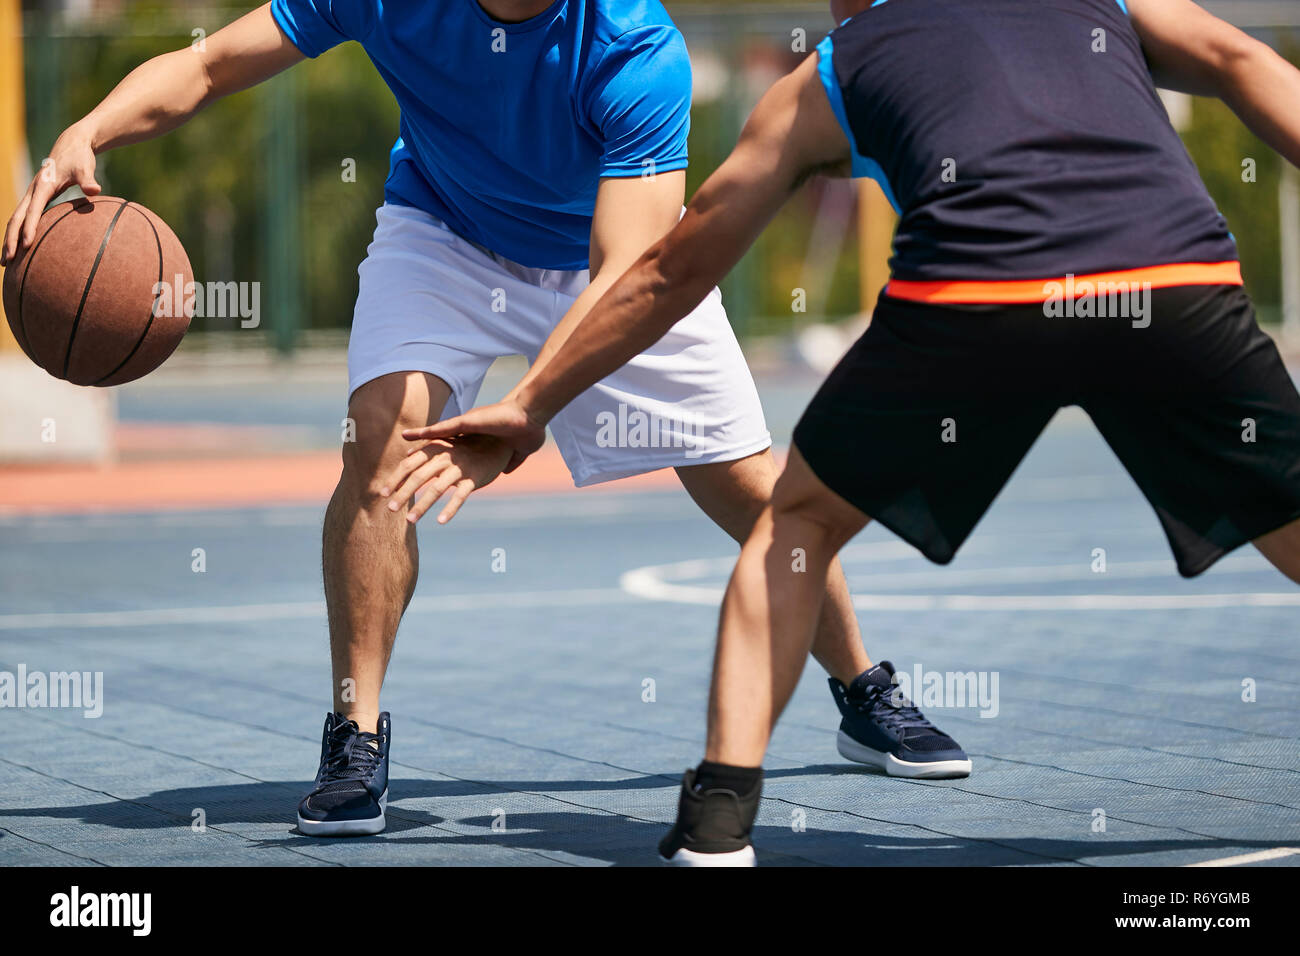 young asian adults playing basketball under the sun on outdoor court. Stock Photo